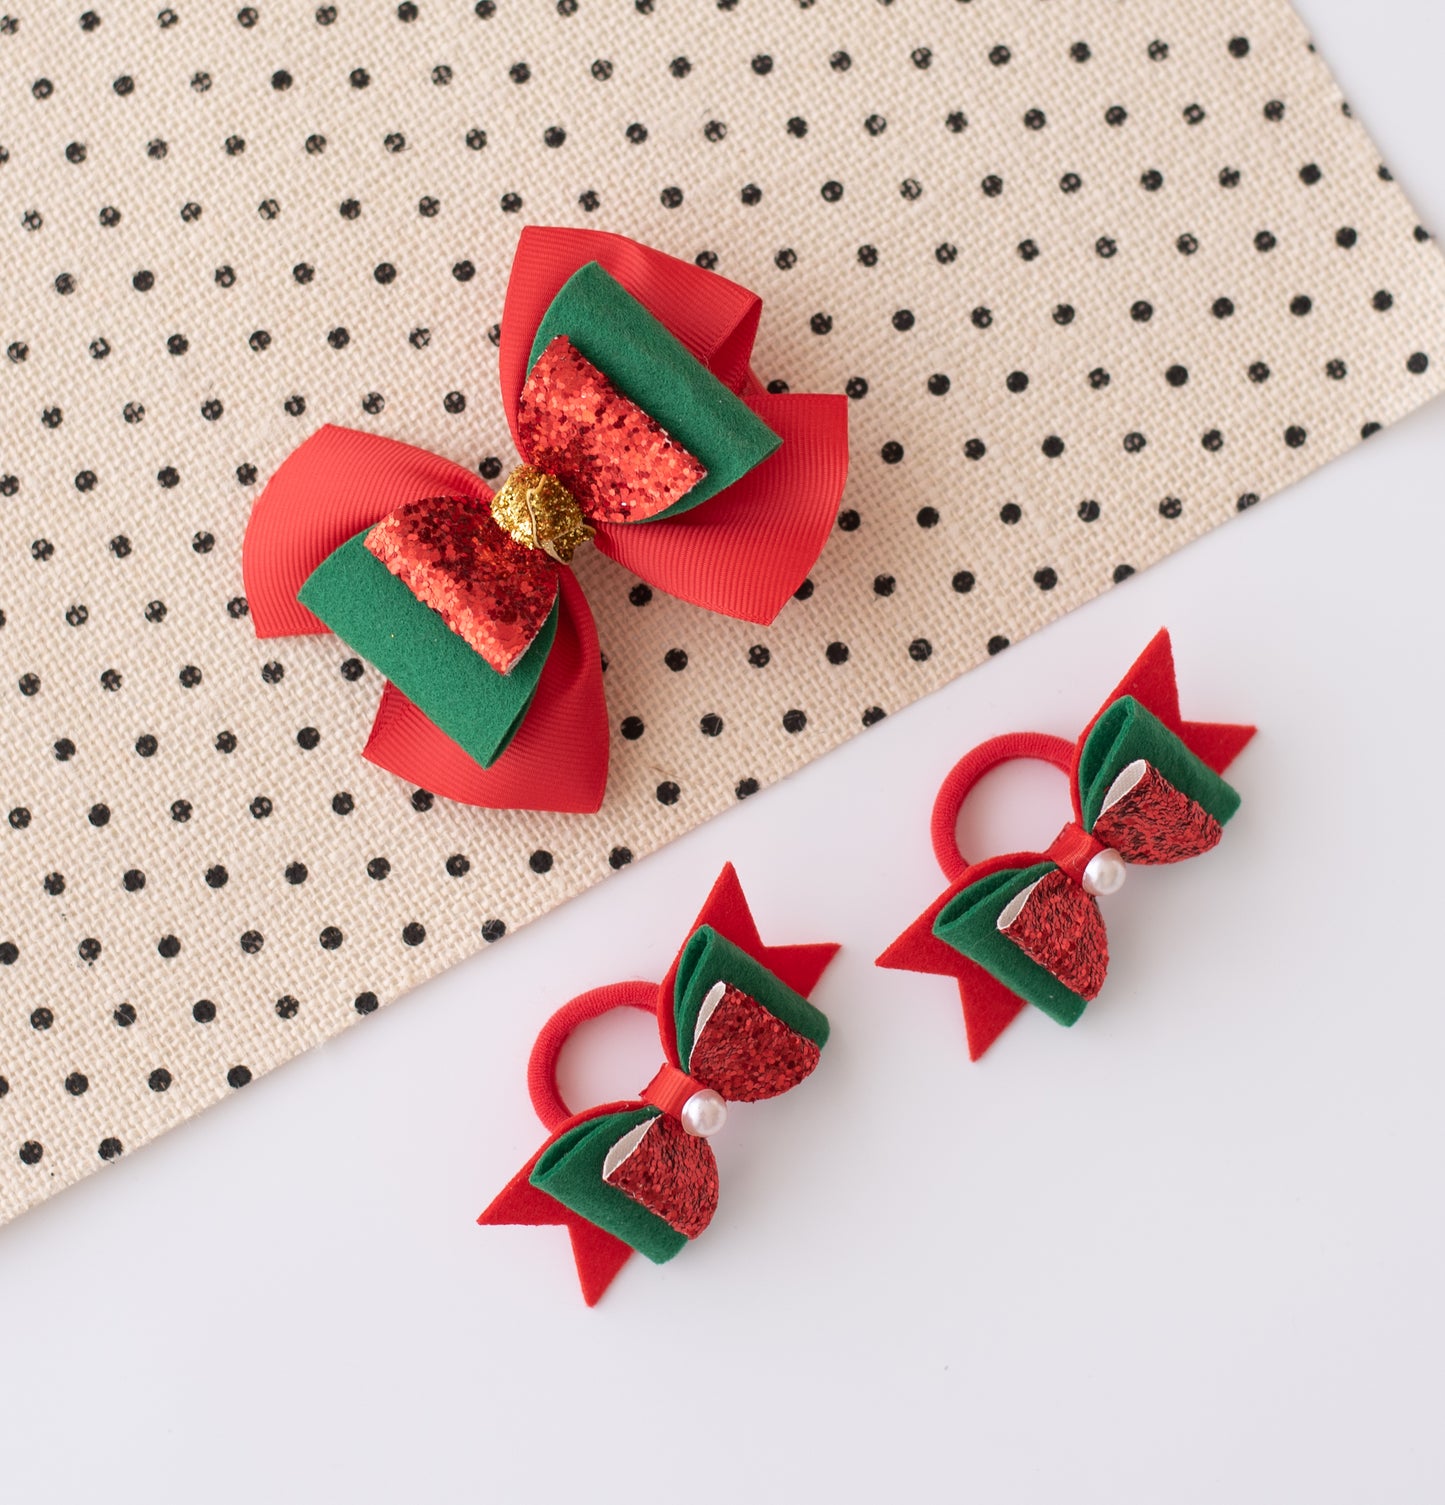 Combo : Set of 1 pair glitter rubberbands and 1 gliter bow on alligator clip. - Red, Green